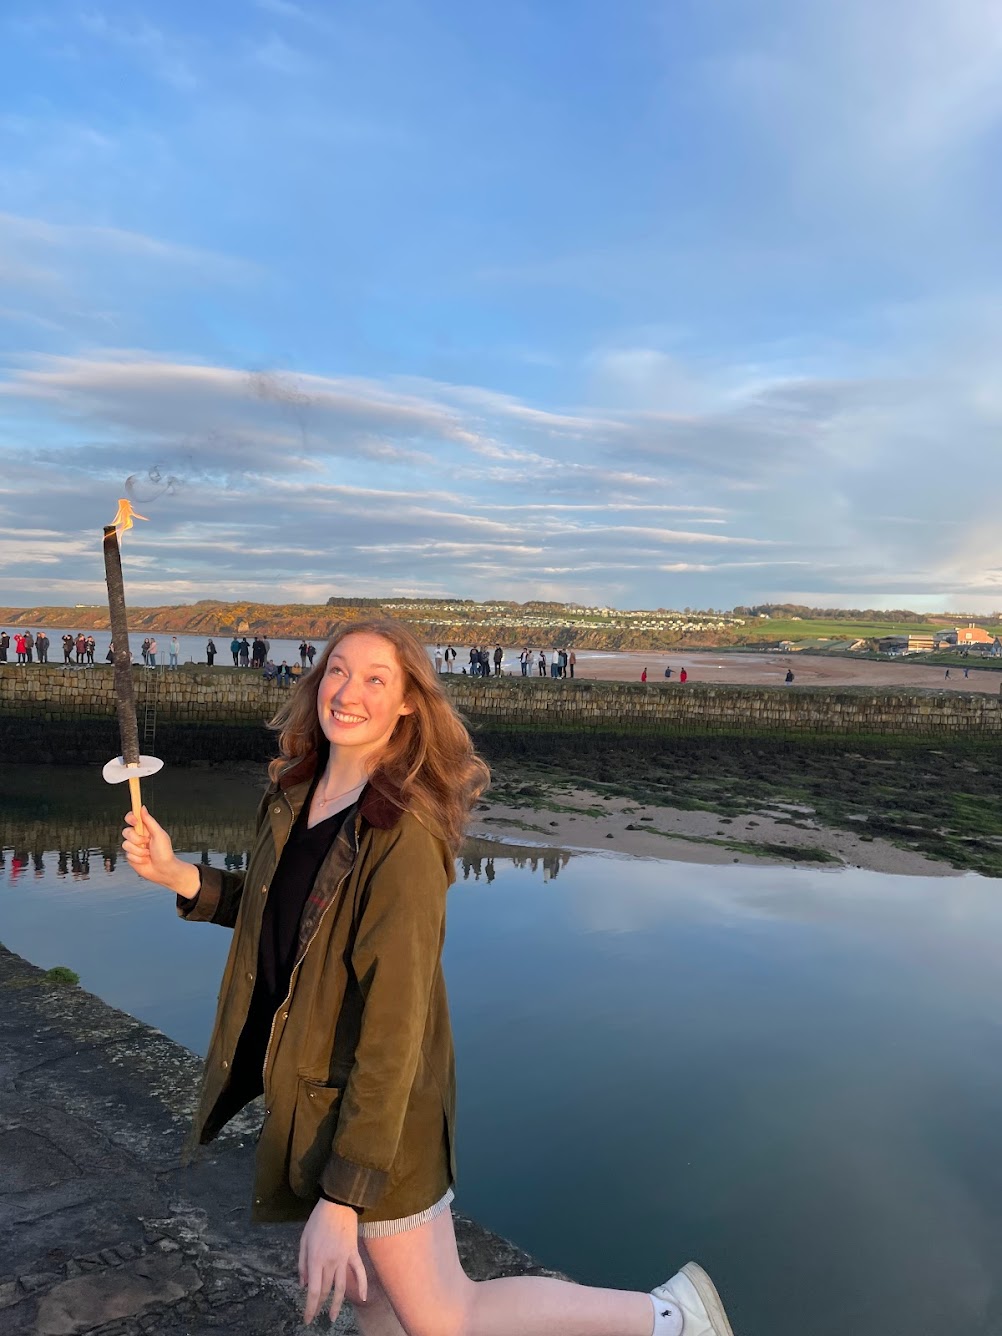 Smiling and looking up into the evening sky, Arden is holding up a lit torch, with the St Andrews pier visible in the background and a number of students walking along to enjoy the views onto the calm sea.